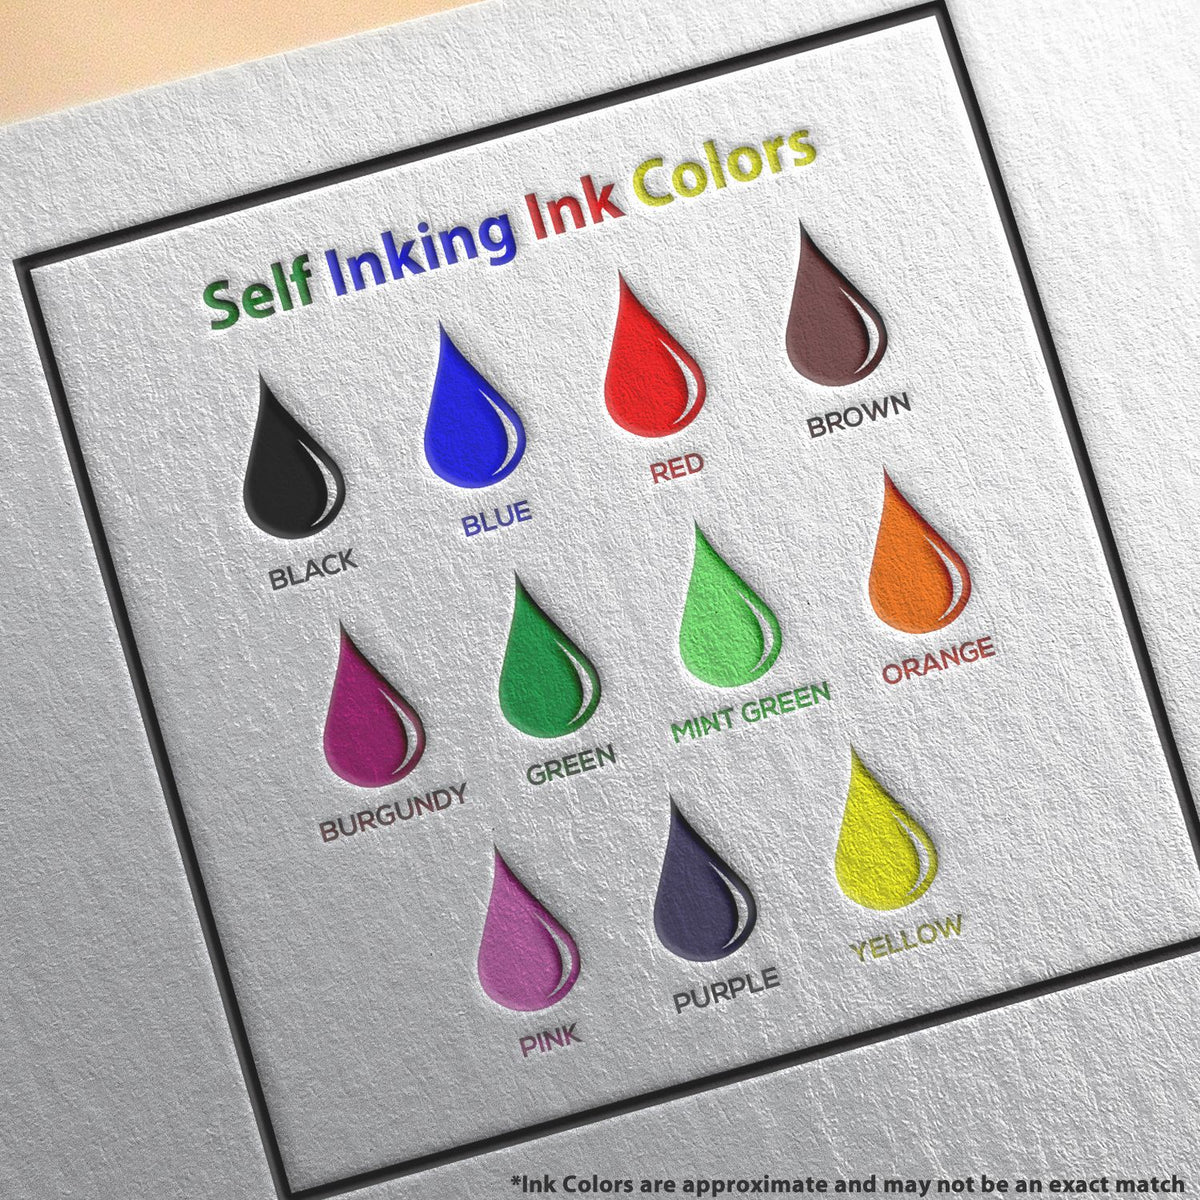 A picture showing the different ink colors or hues available for the Self-Inking Tennessee Landscape Architect Stamp product.